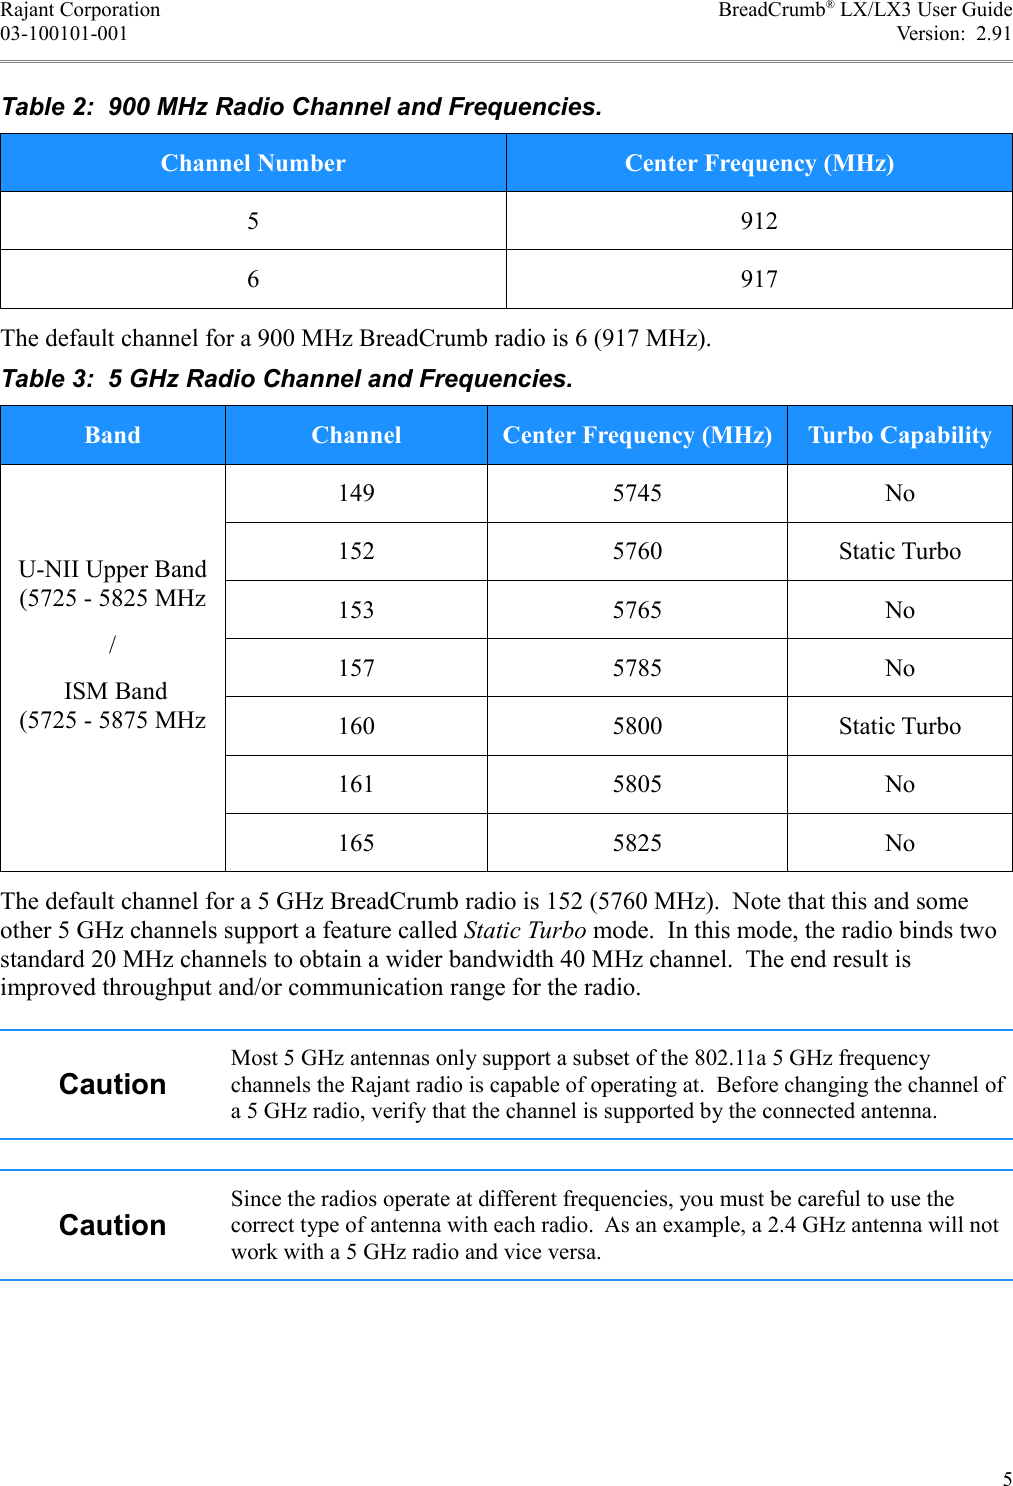 Rajant Corporation BreadCrumb® LX/LX3 User Guide03-100101-001 Version:  2.91Table 2:  900 MHz Radio Channel and Frequencies.Channel Number Center Frequency (MHz)5 9126 917The default channel for a 900 MHz BreadCrumb radio is 6 (917 MHz).Table 3:  5 GHz Radio Channel and Frequencies.Band Channel Center Frequency (MHz) Turbo CapabilityU-NII Upper Band (5725 - 5825 MHz/ ISM Band (5725 - 5875 MHz149 5745 No152 5760 Static Turbo153 5765 No157 5785 No160 5800 Static Turbo161 5805 No165 5825 NoThe default channel for a 5 GHz BreadCrumb radio is 152 (5760 MHz).  Note that this and some other 5 GHz channels support a feature called Static Turbo mode.  In this mode, the radio binds two standard 20 MHz channels to obtain a wider bandwidth 40 MHz channel.  The end result is improved throughput and/or communication range for the radio. CautionMost 5 GHz antennas only support a subset of the 802.11a 5 GHz frequency channels the Rajant radio is capable of operating at.  Before changing the channel of a 5 GHz radio, verify that the channel is supported by the connected antenna.CautionSince the radios operate at different frequencies, you must be careful to use the correct type of antenna with each radio.  As an example, a 2.4 GHz antenna will not work with a 5 GHz radio and vice versa.5